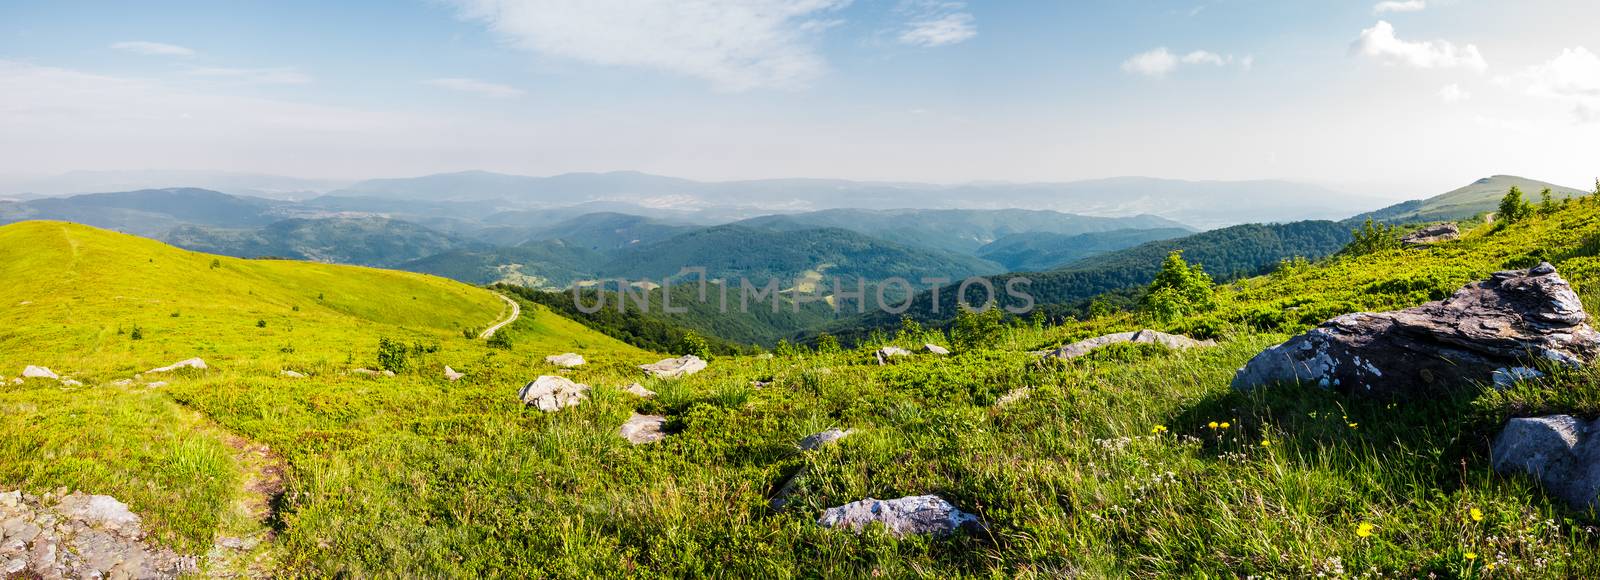 panoramic view from the hillside by Pellinni